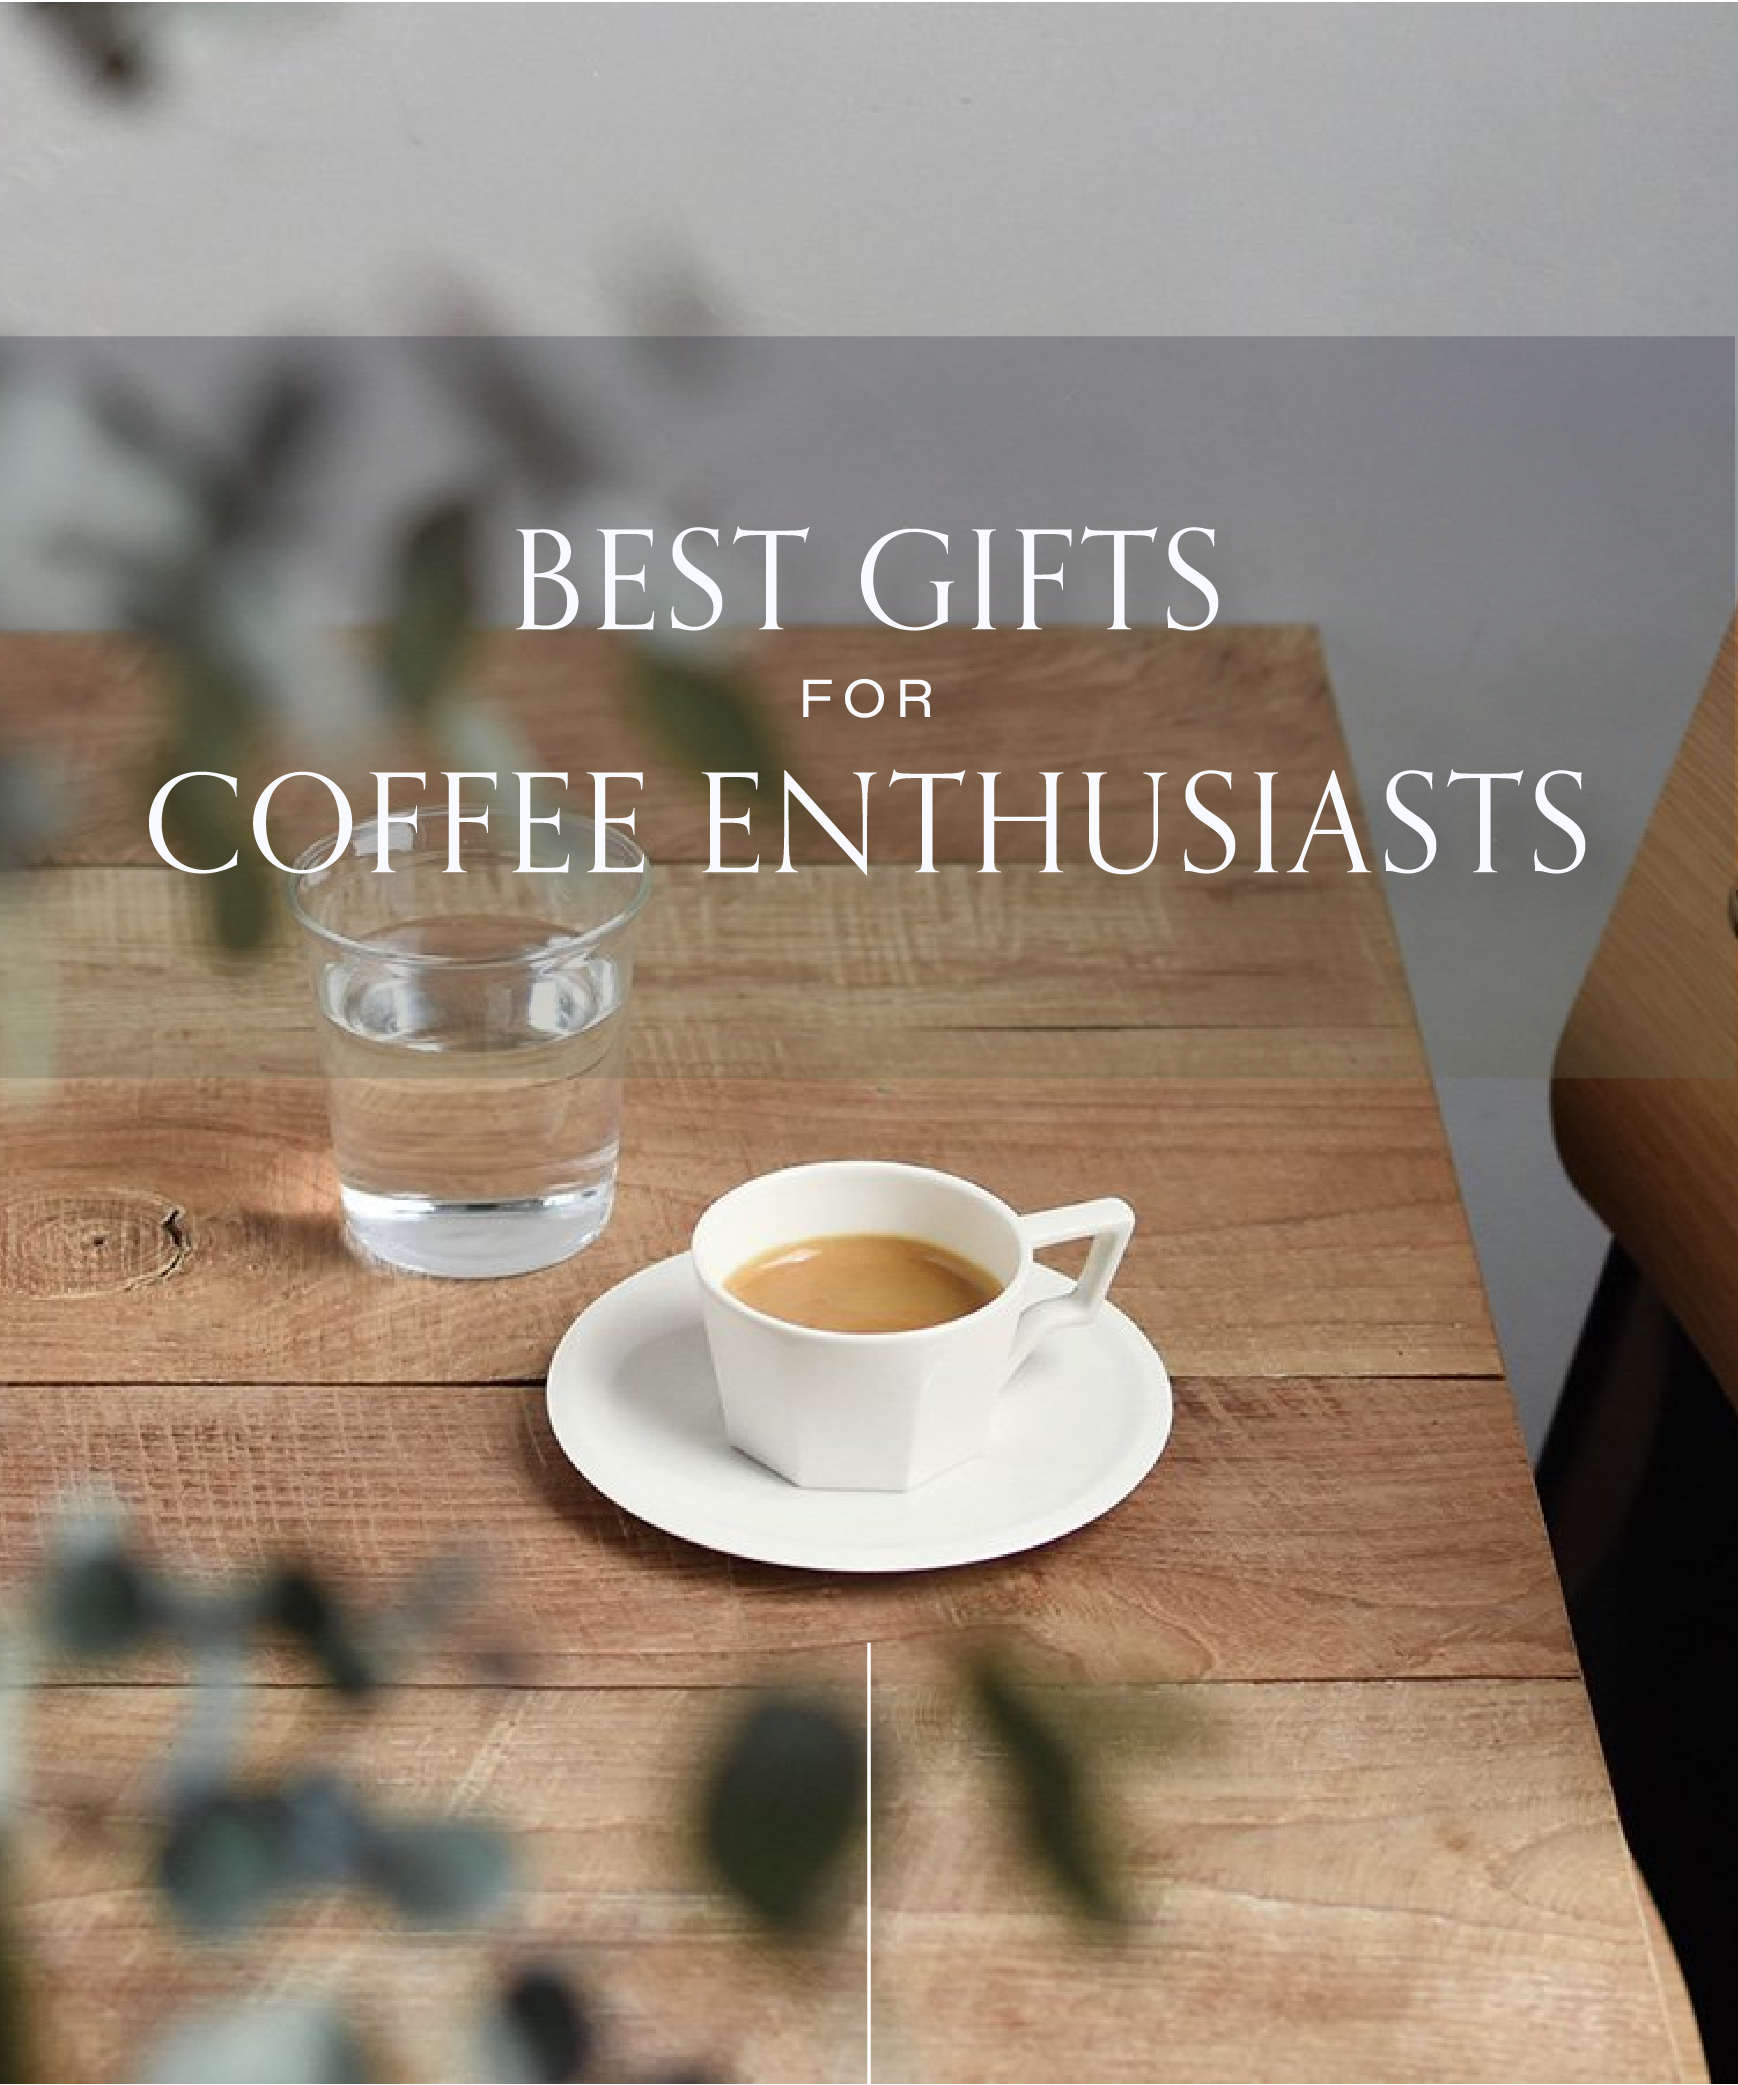 Best Gifts for Coffee Enthusiasts